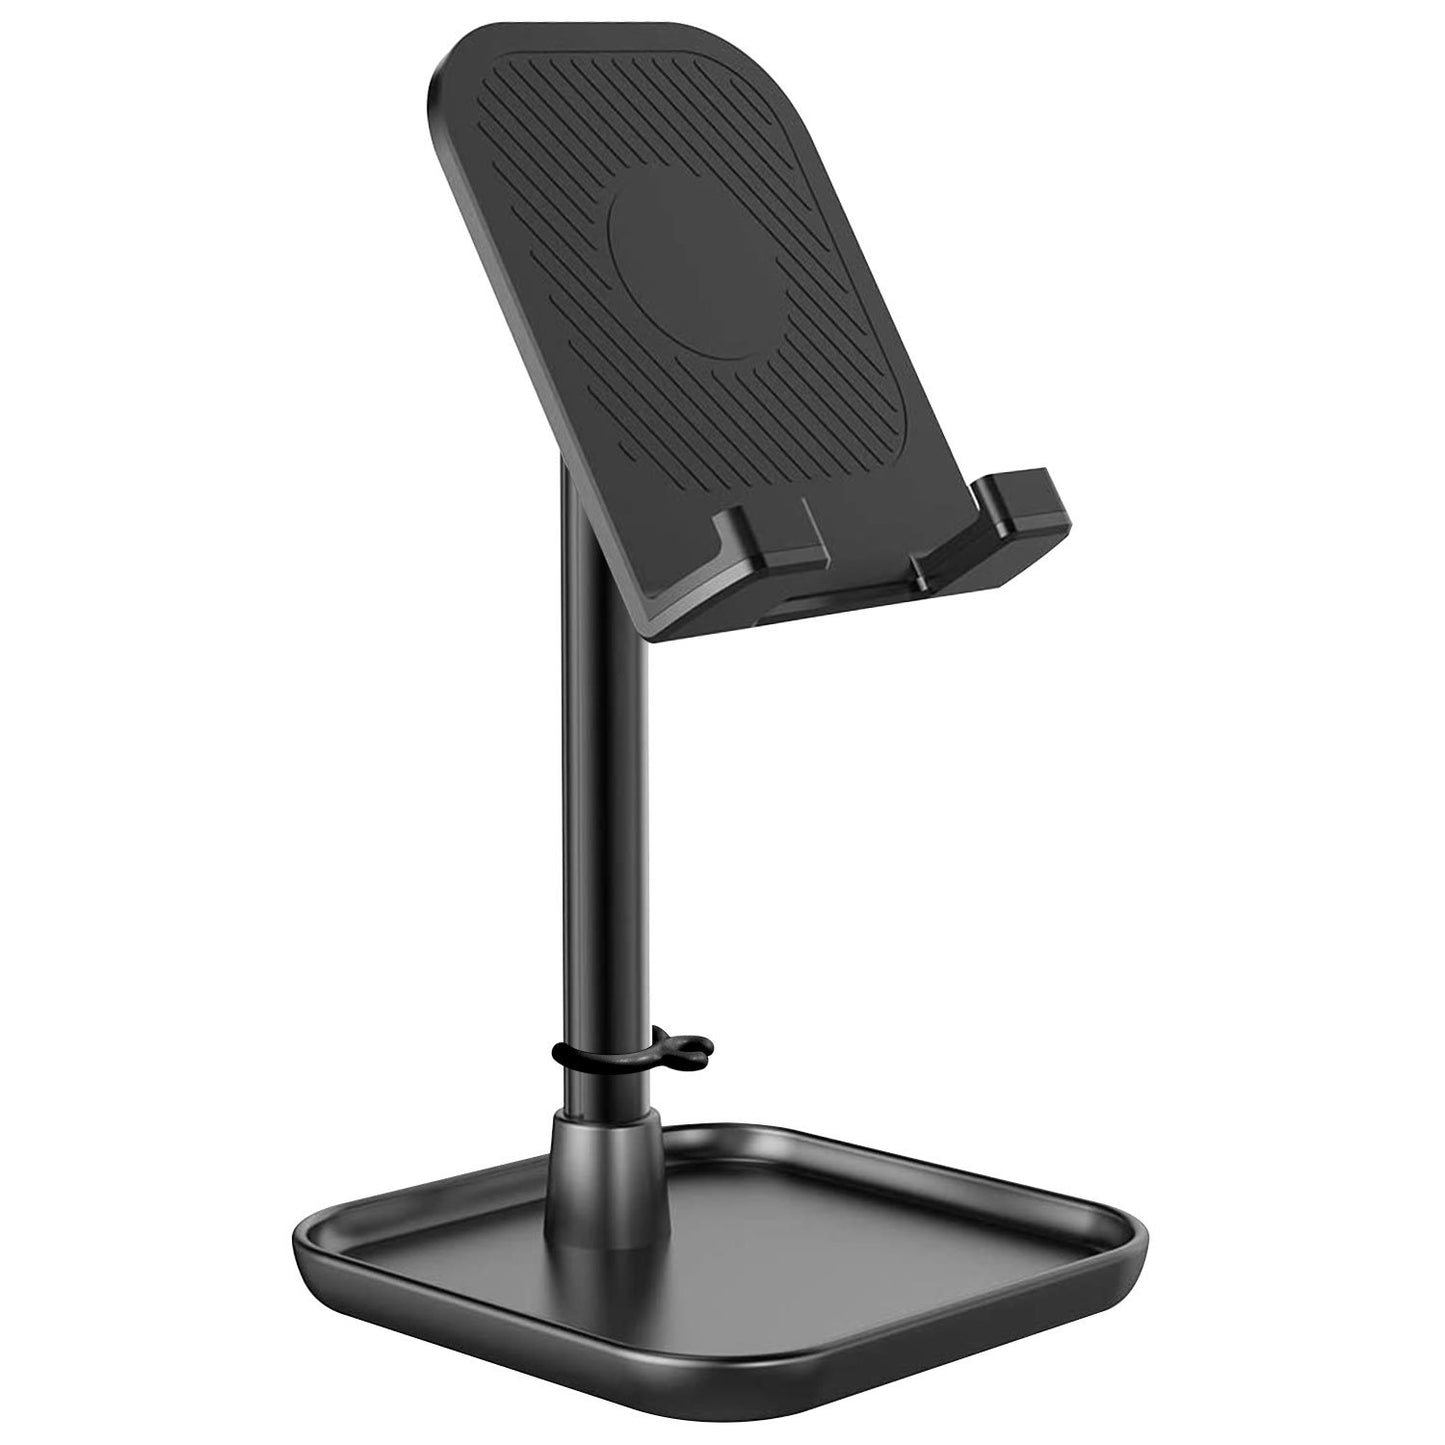 PH150BK - Heavy Duty Adjustable Phone Stand with Mini Shelf, Non-Slip Rubberized Grips and Base Compatible to Smartphones, Tablets, iPads